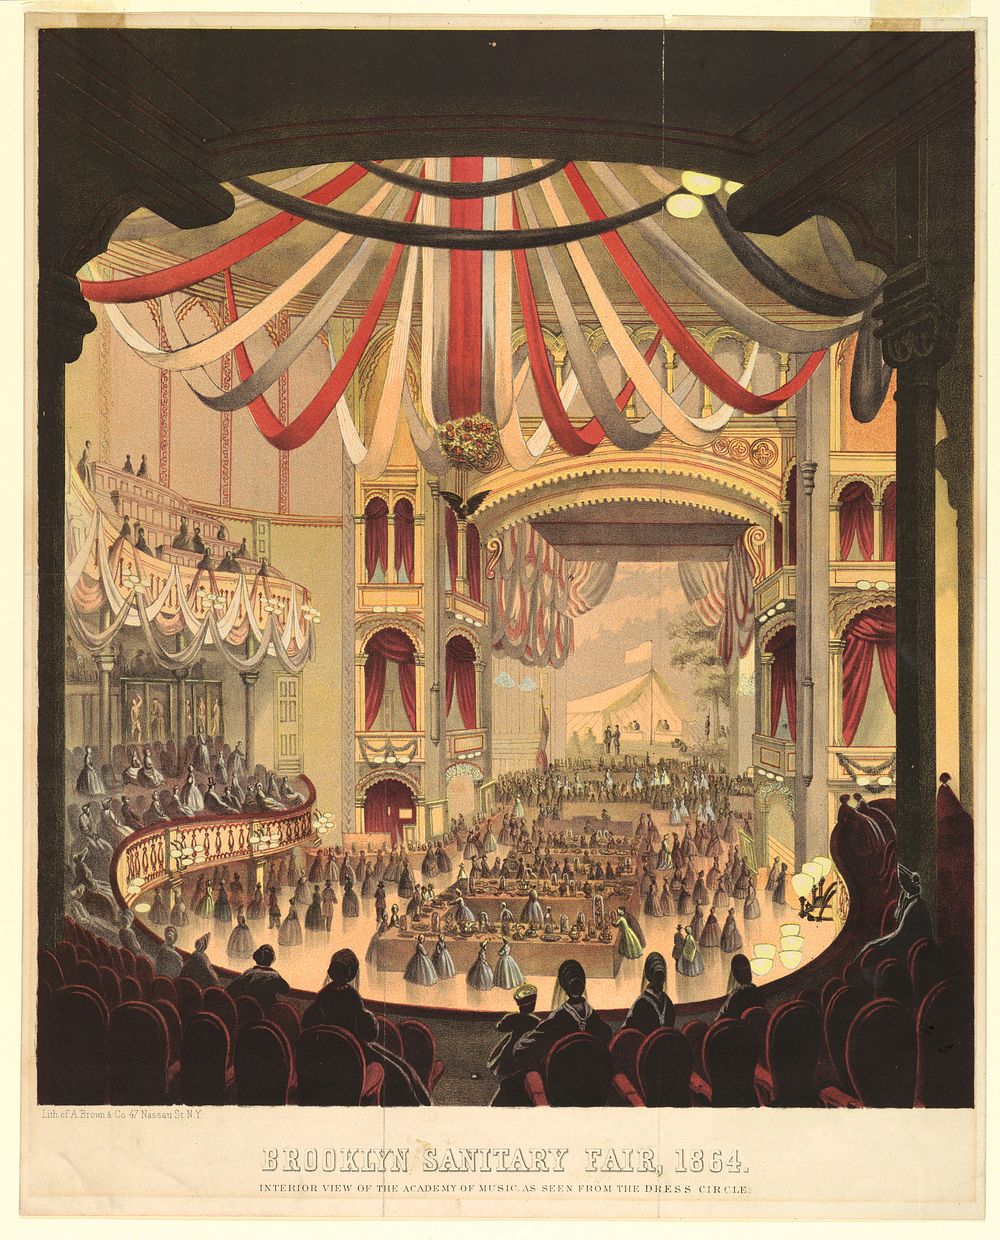 Interior View of the Academy of Music as Seen from Dress Circle, A. Brown and Company